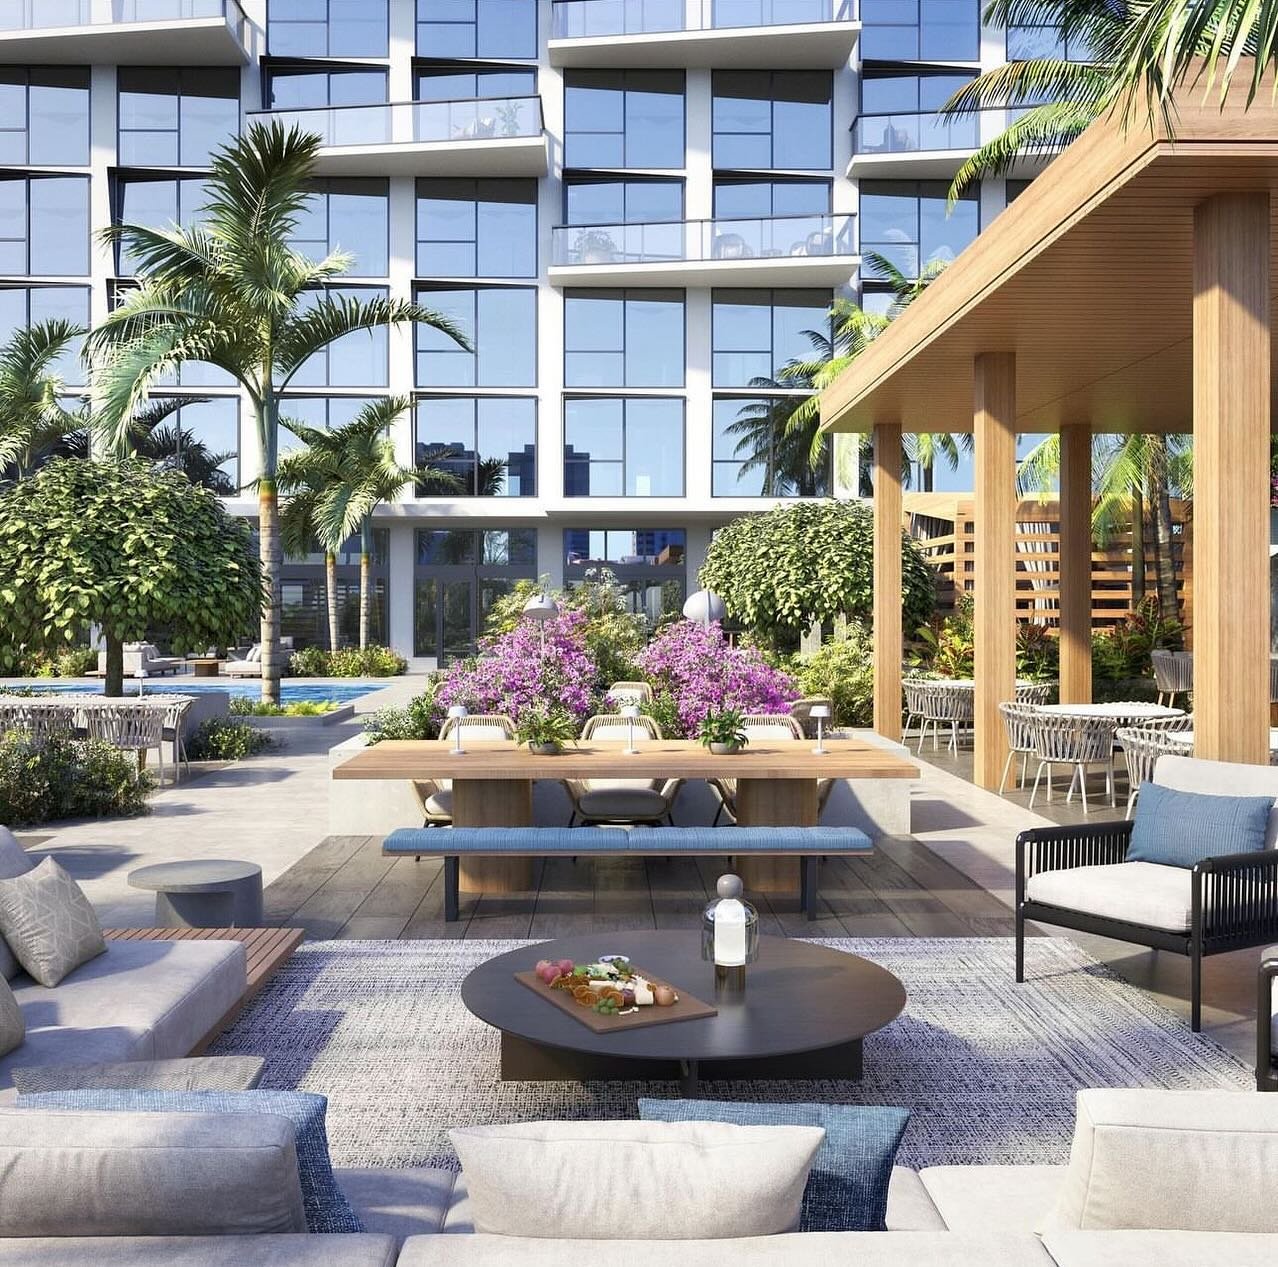 The Laurel has officially welcomed its first residents! Follow @thelaurelwpb to find out more about these wonderful residences in the heart of West Palm Beach, and to schedule your tour . #westpalmbeach #relatedrentals